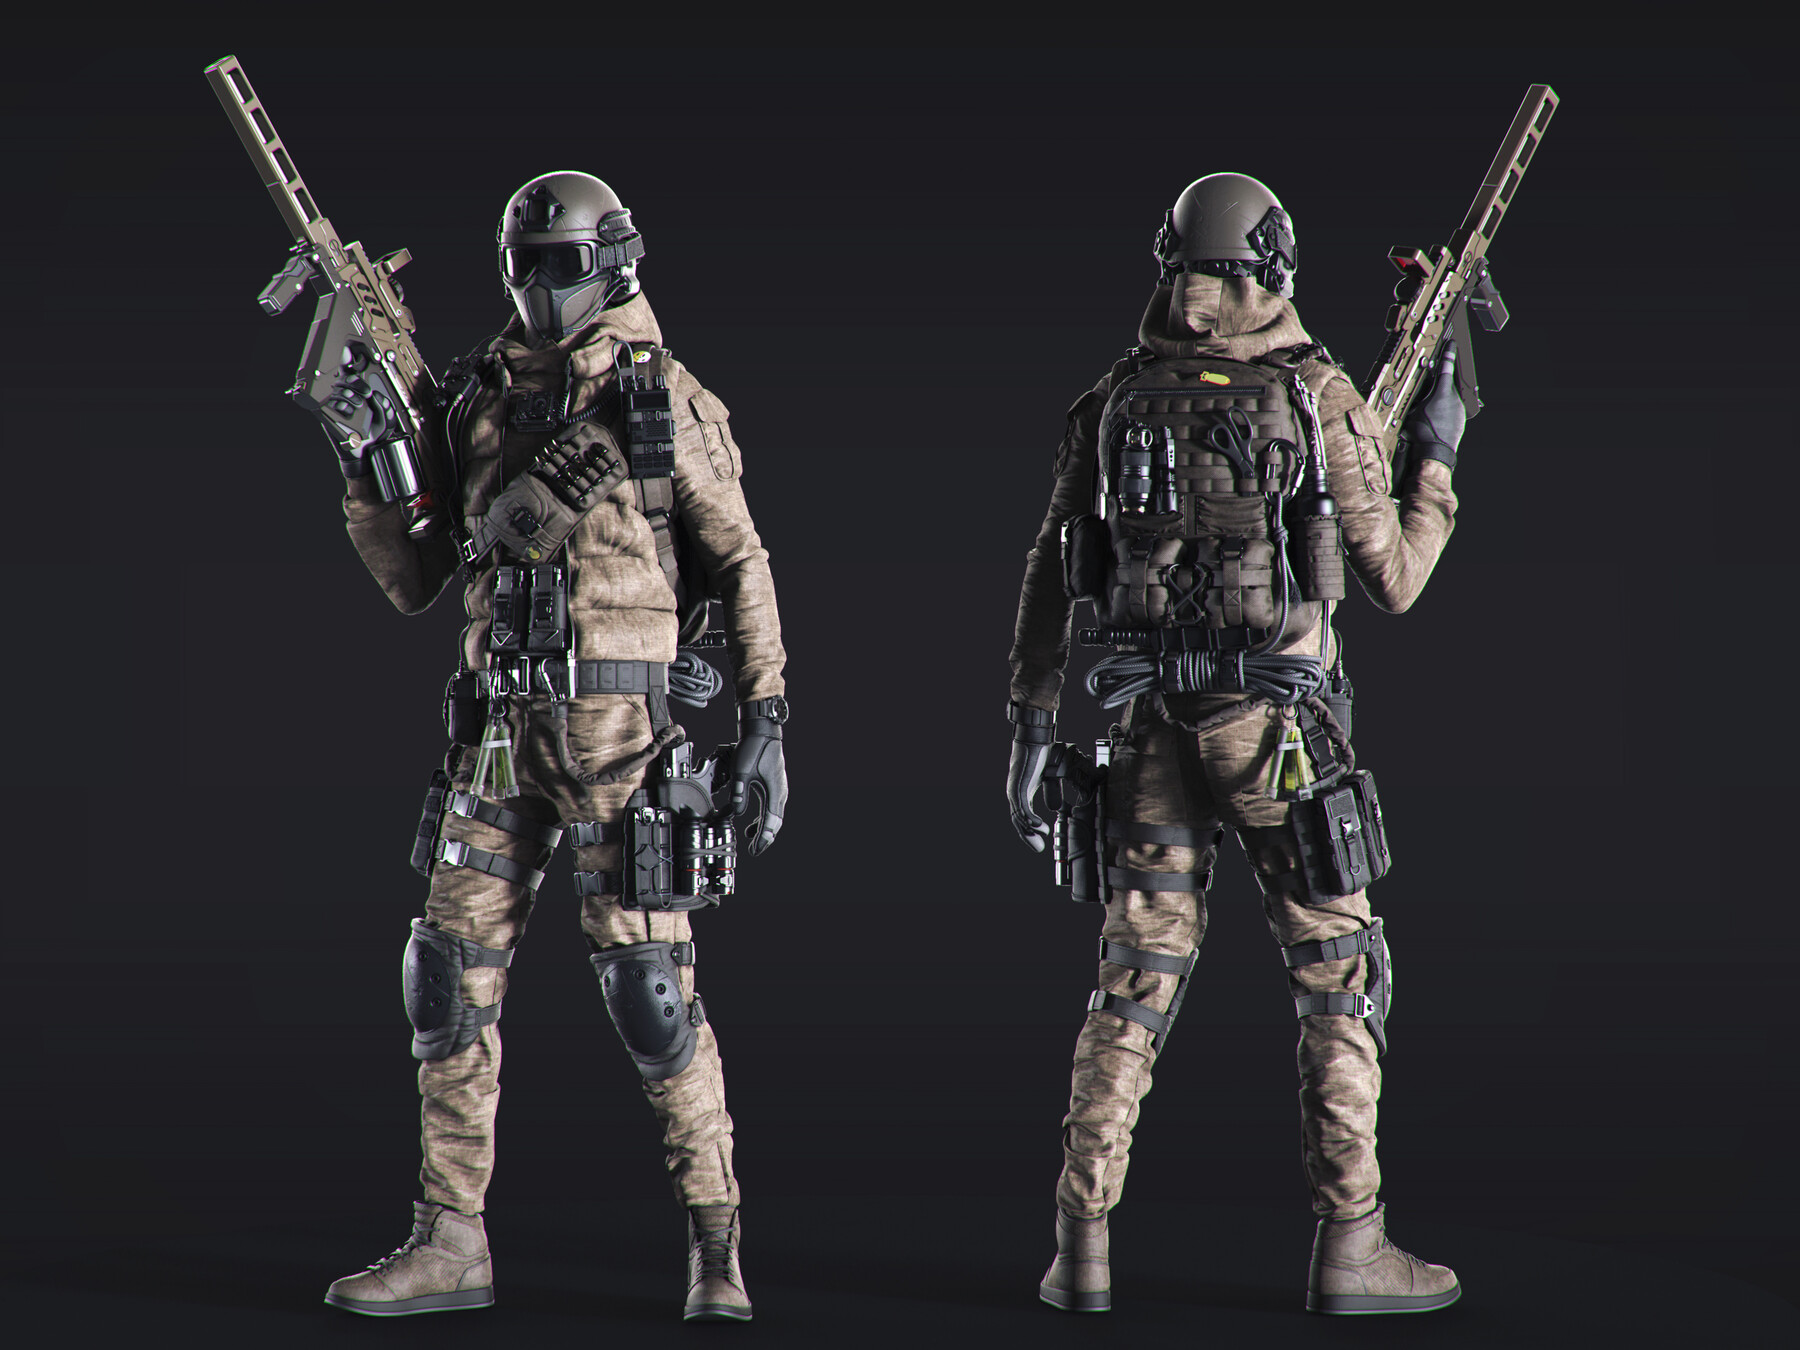 ArtStation - 50 HQ Poses 3D models of soldiers | Game Assets